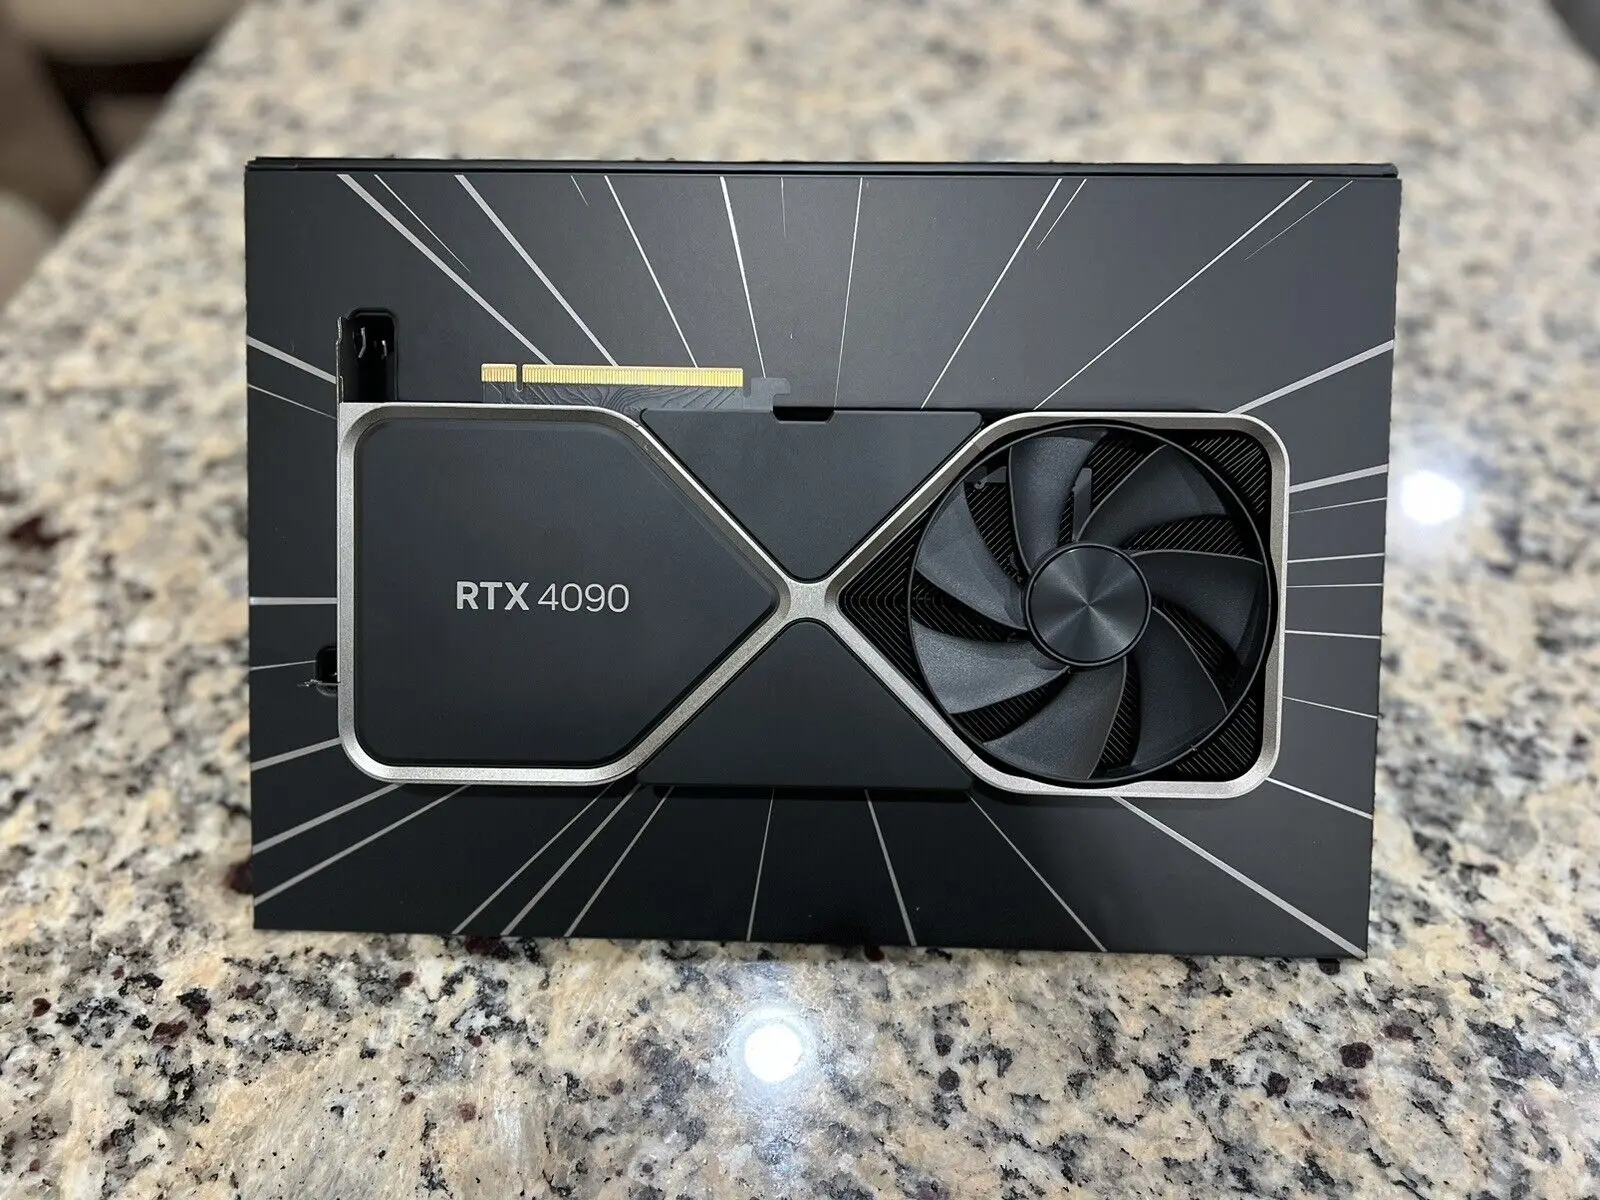 

BUY 5 GET 3 FREE NVIDIA GeForce RTX 4090 Founders Edition 24GB GDDR6X Graphics Card